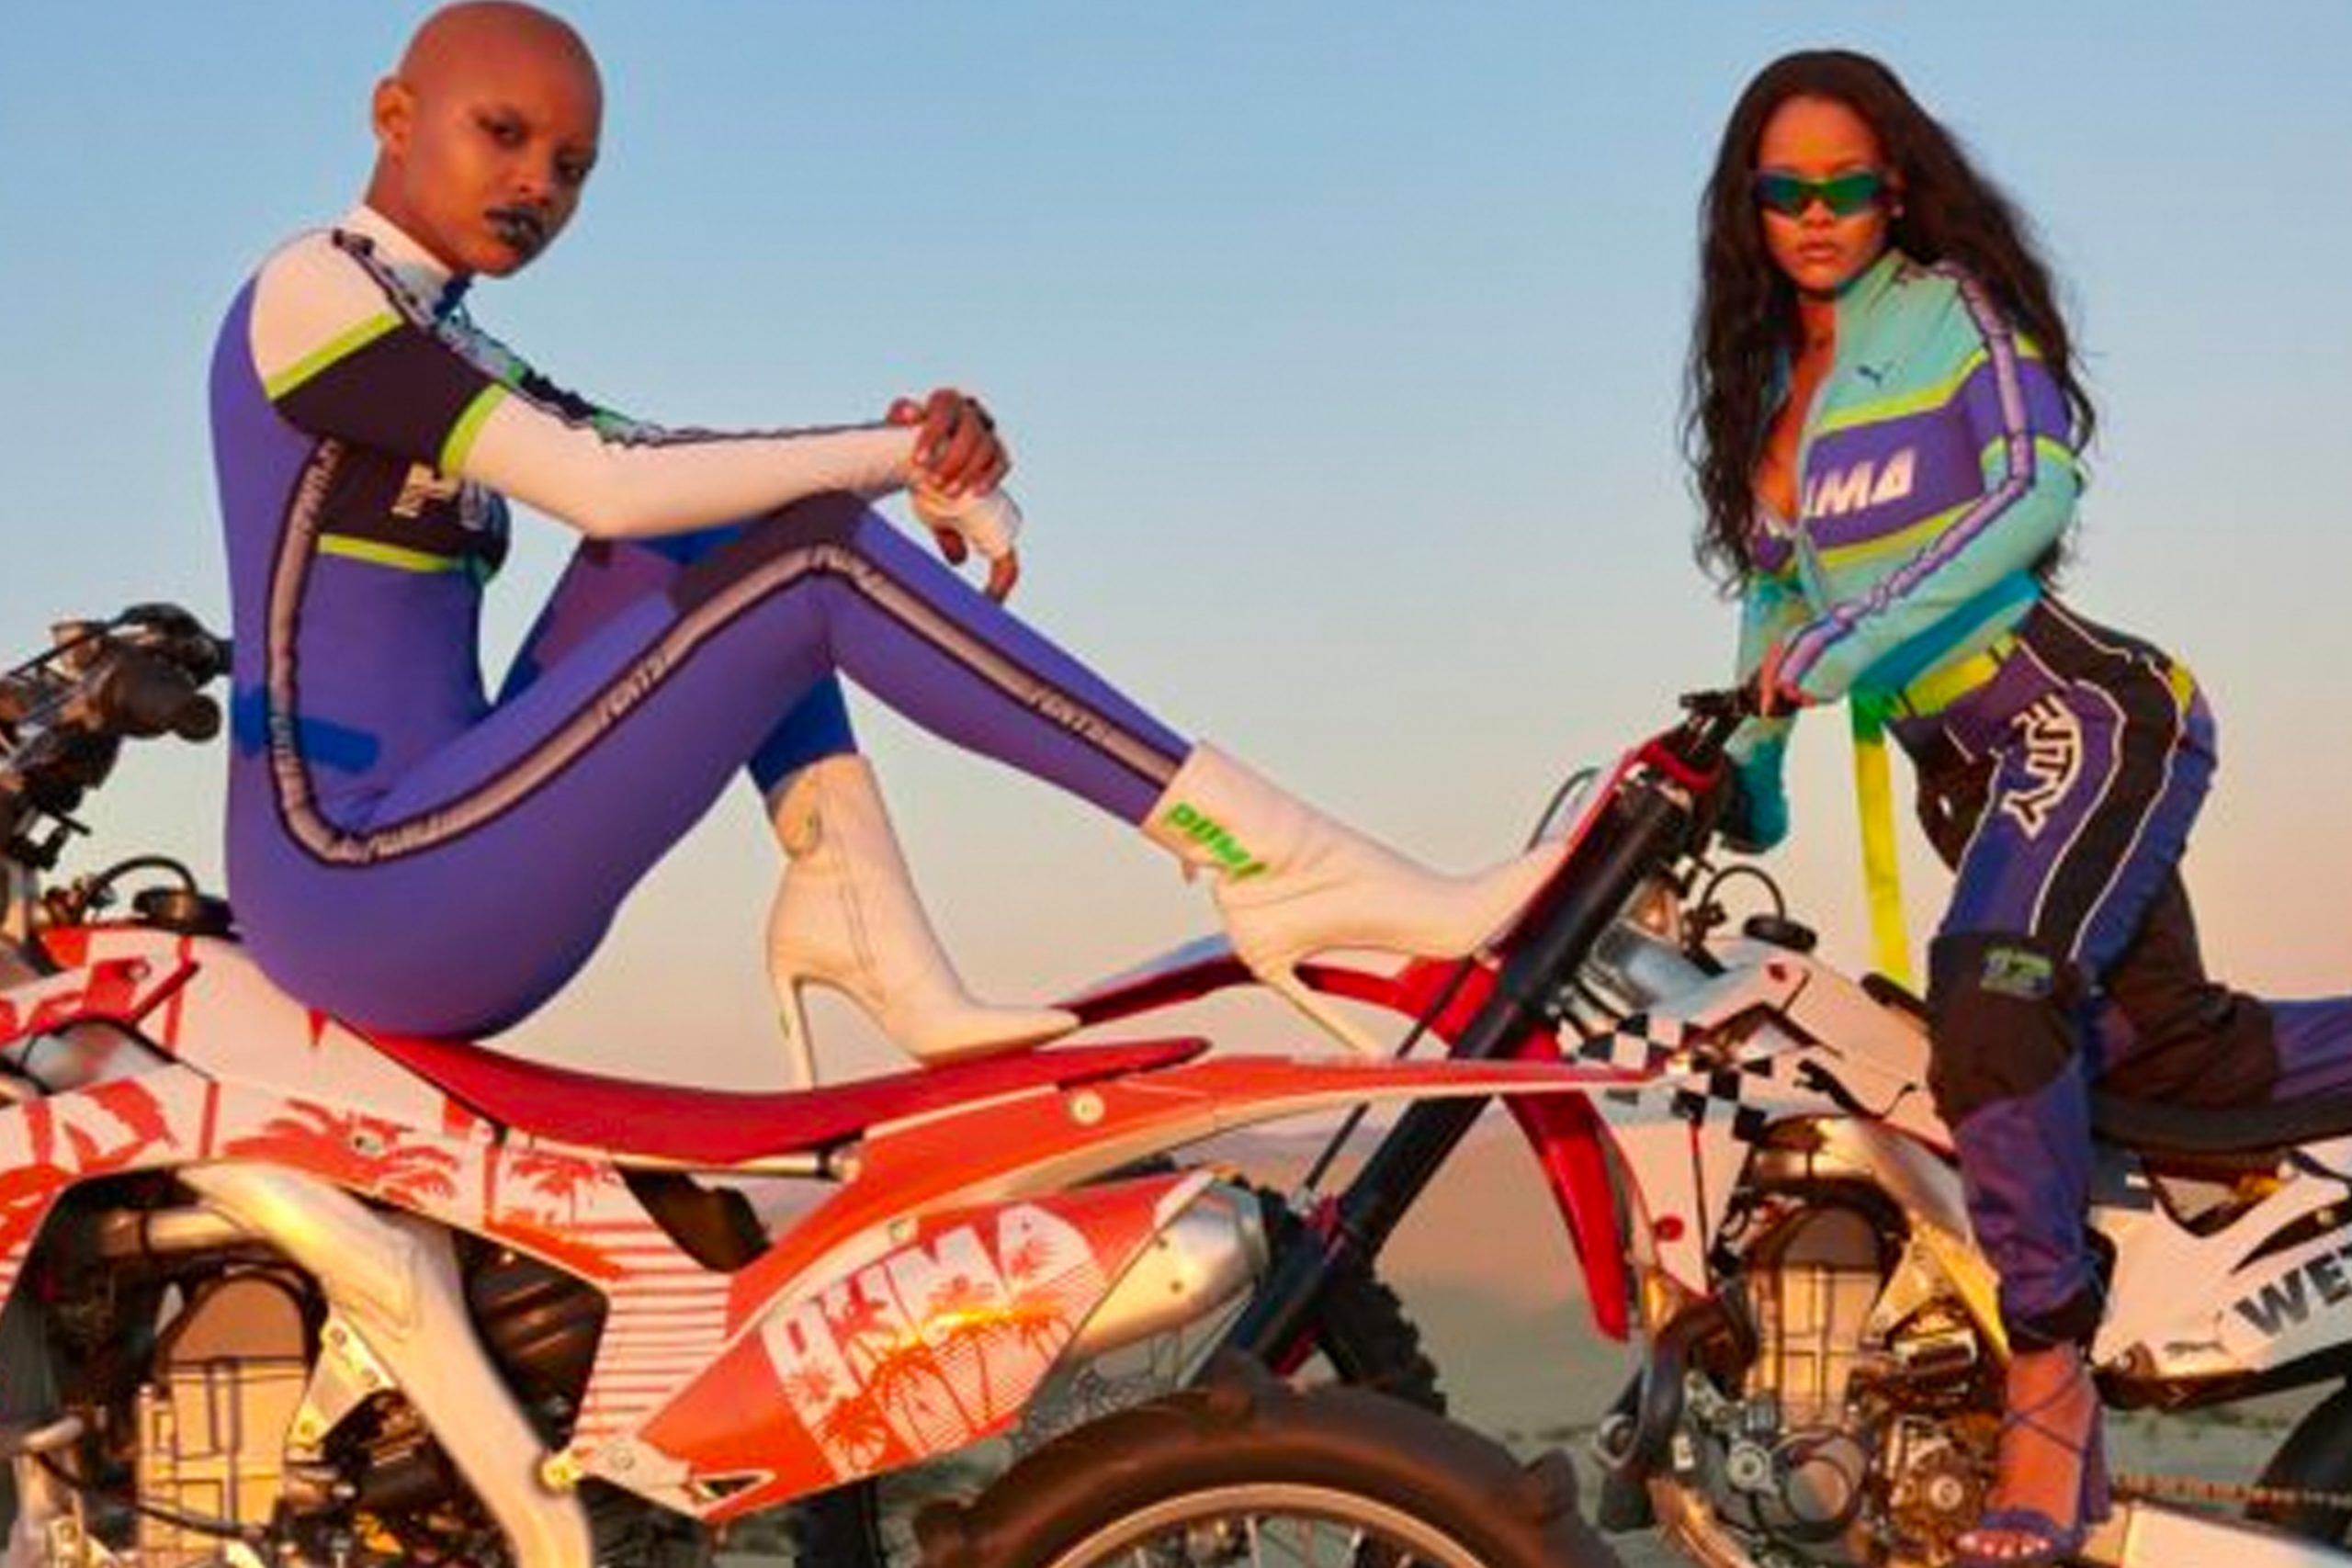 Rihanna and a girl on the motorcycles